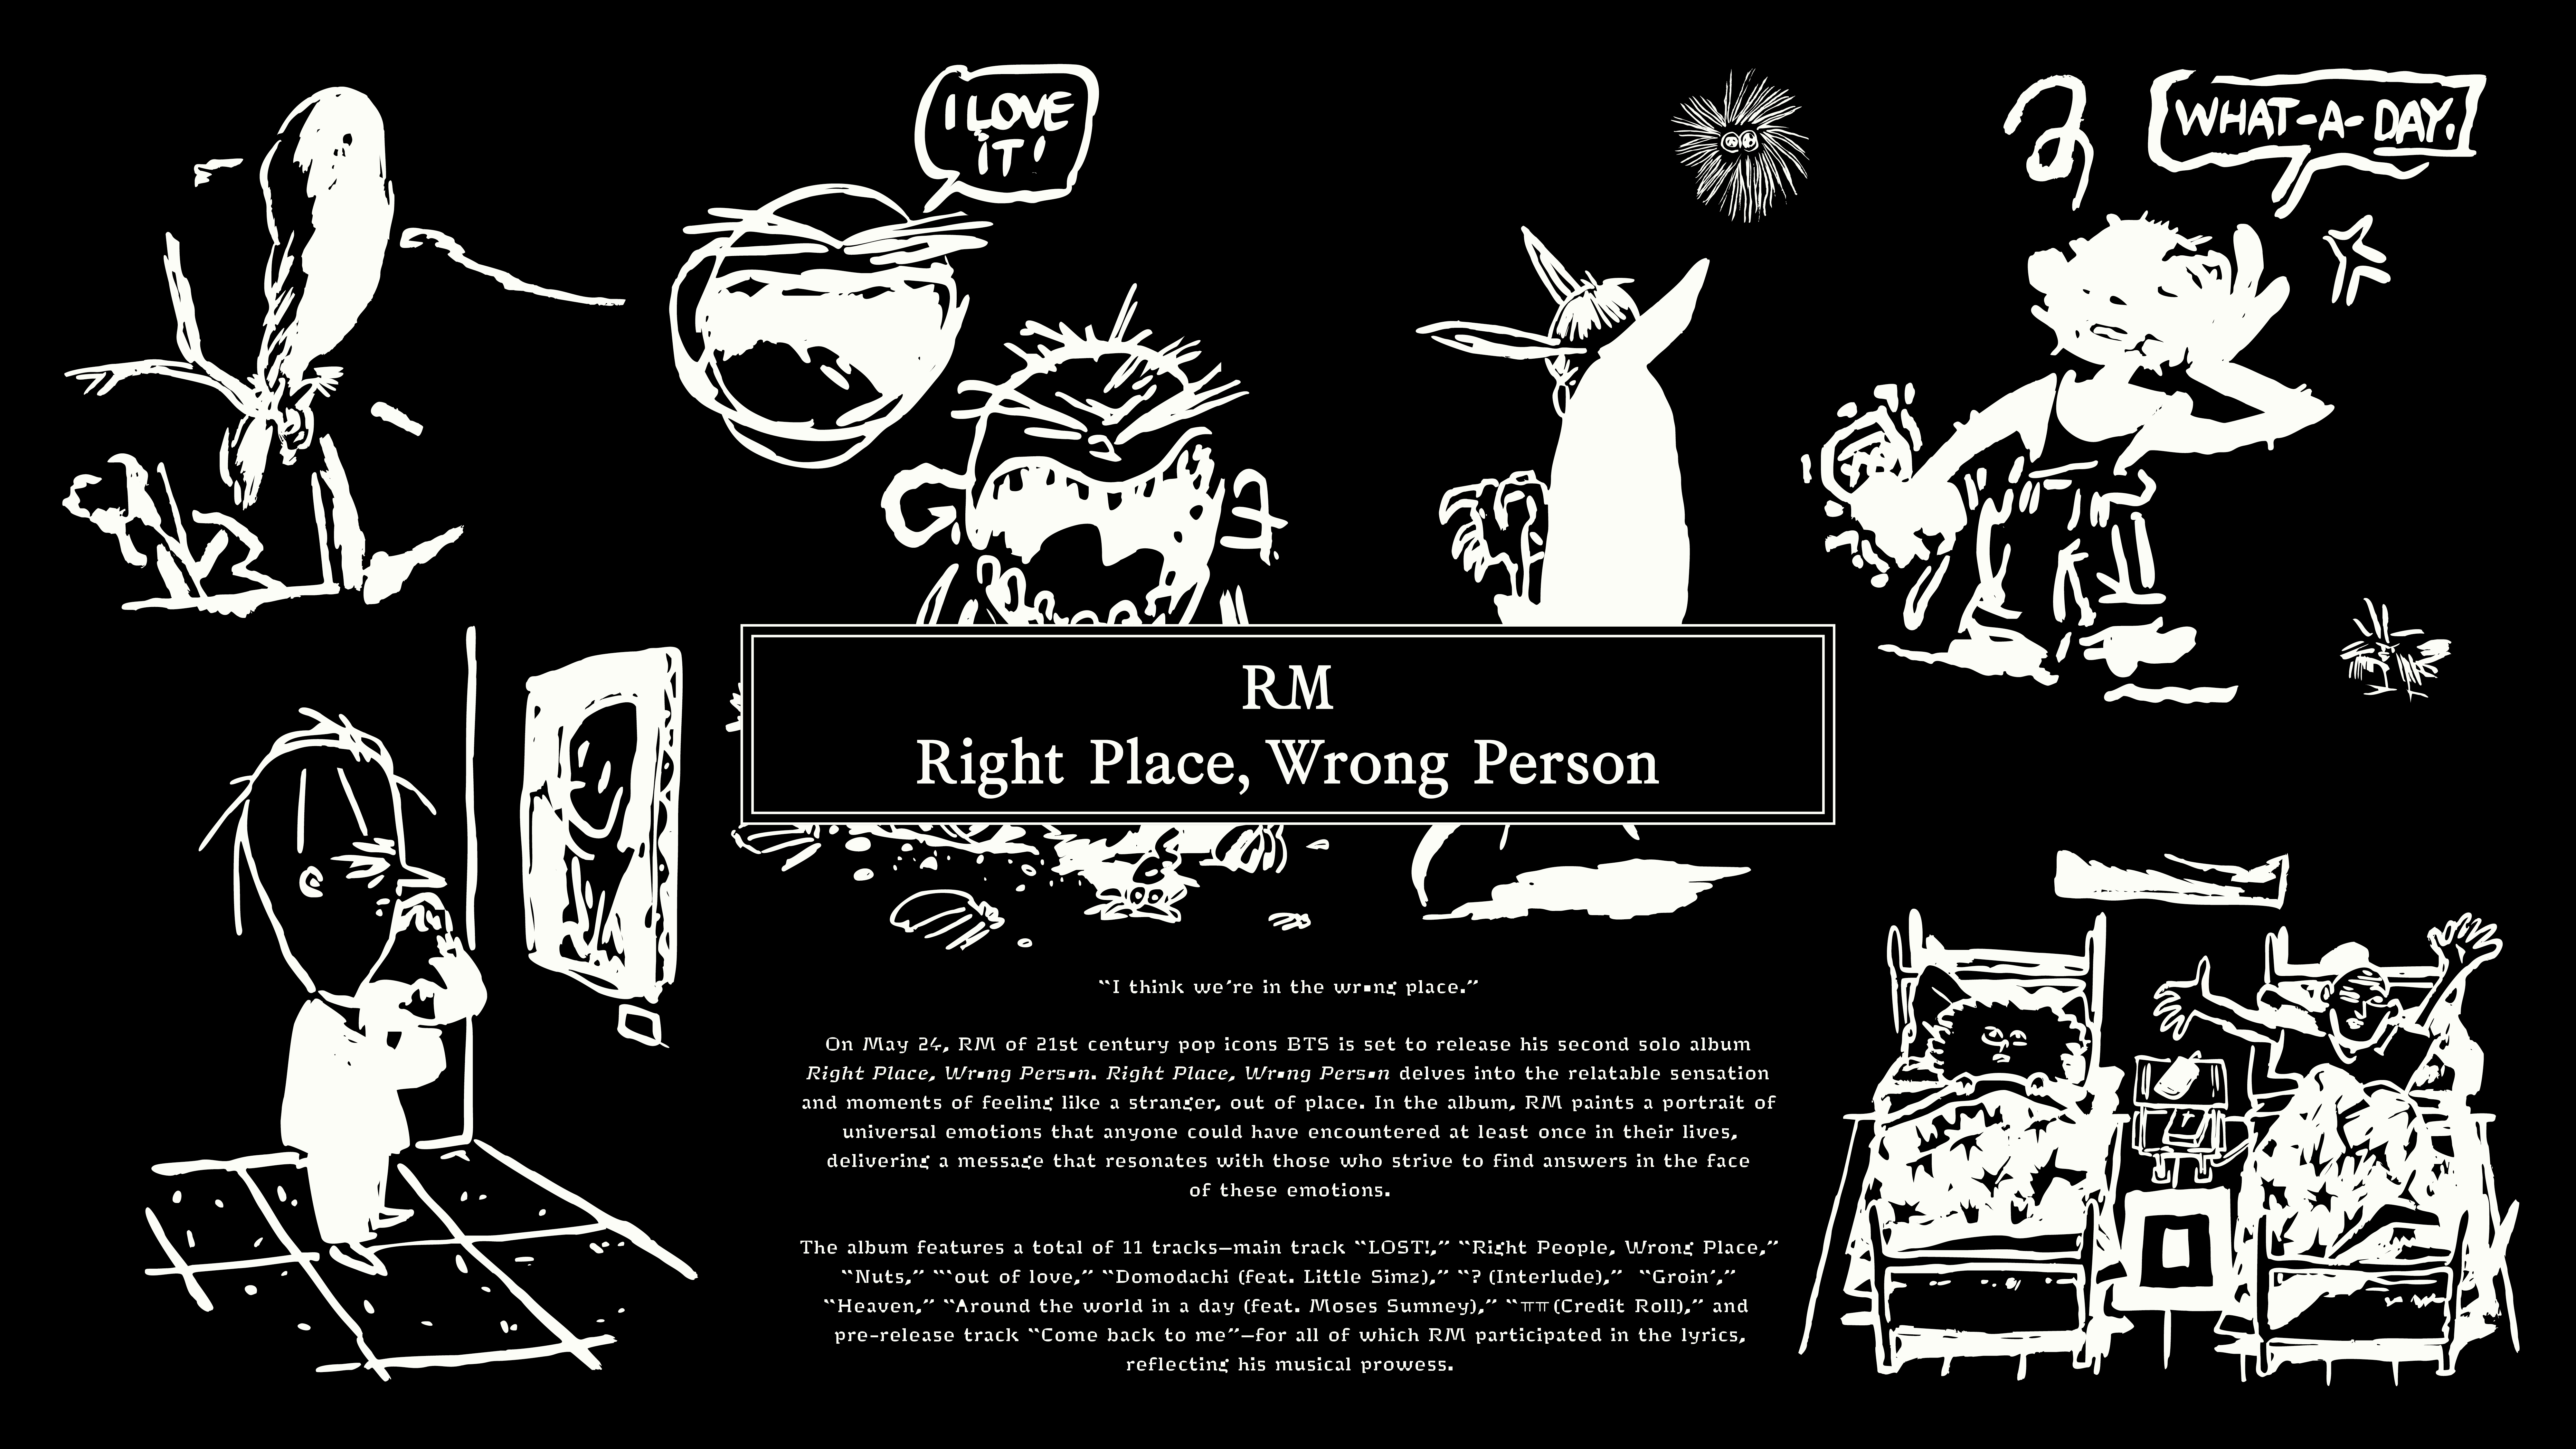 RM, Right Place, Wrong Person